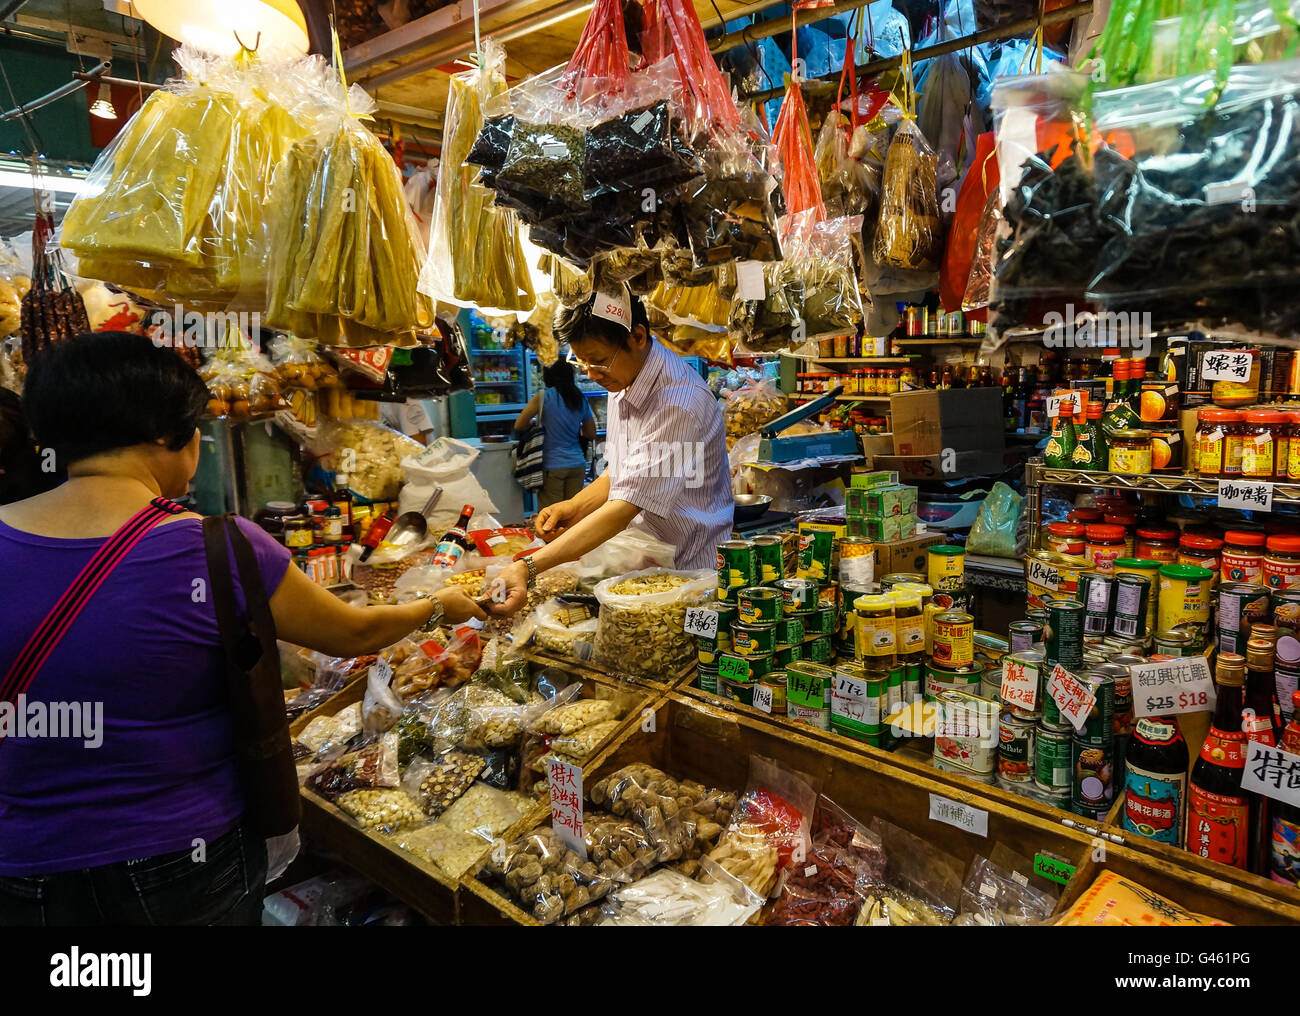 Hong Kong - August 2: A Chinese vendor sells groceries from a street wet market stall in Tai Po Aug. 2, 2013. Stock Photo